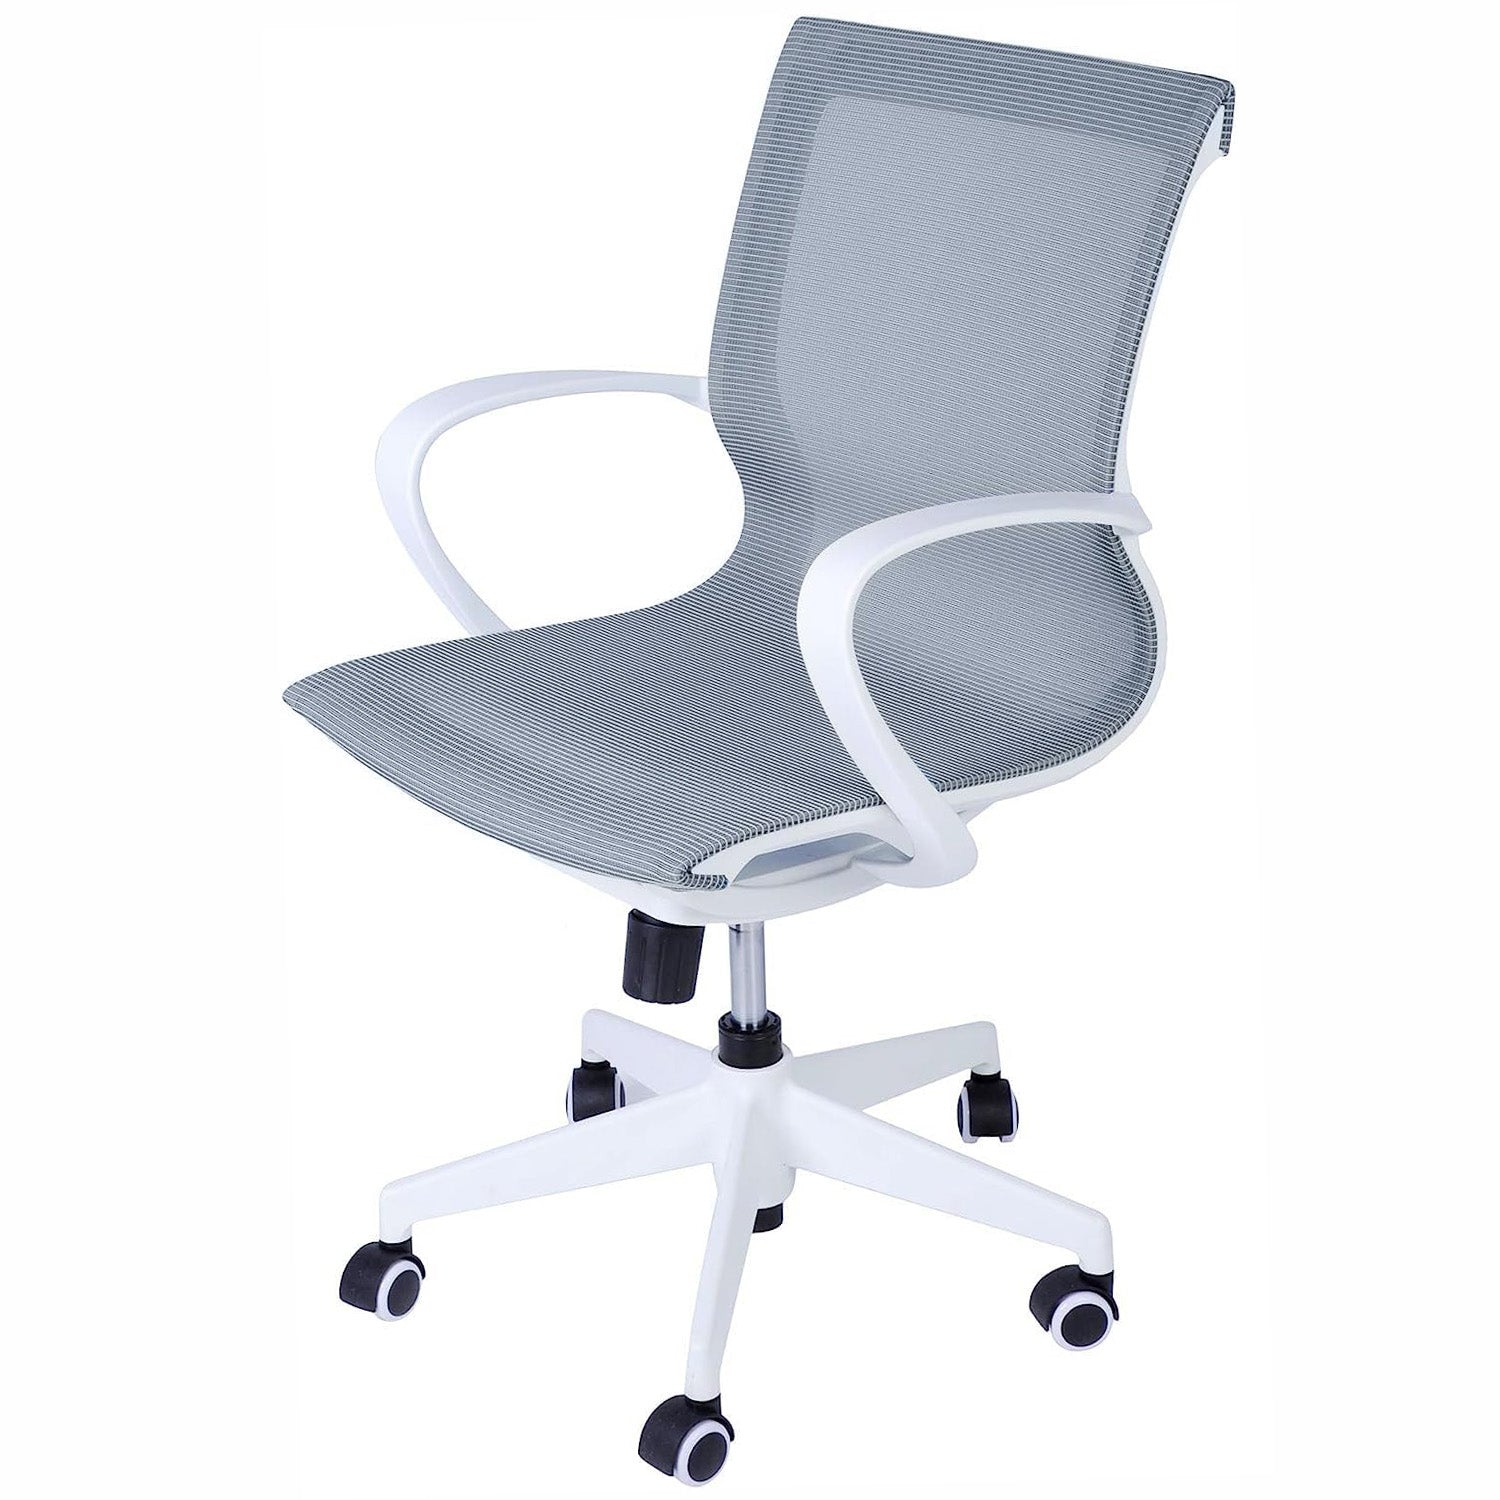 LUCKYERMORE Home Office Chair Mesh Chair Breathable Back Seat Height Adjustable, Blue White